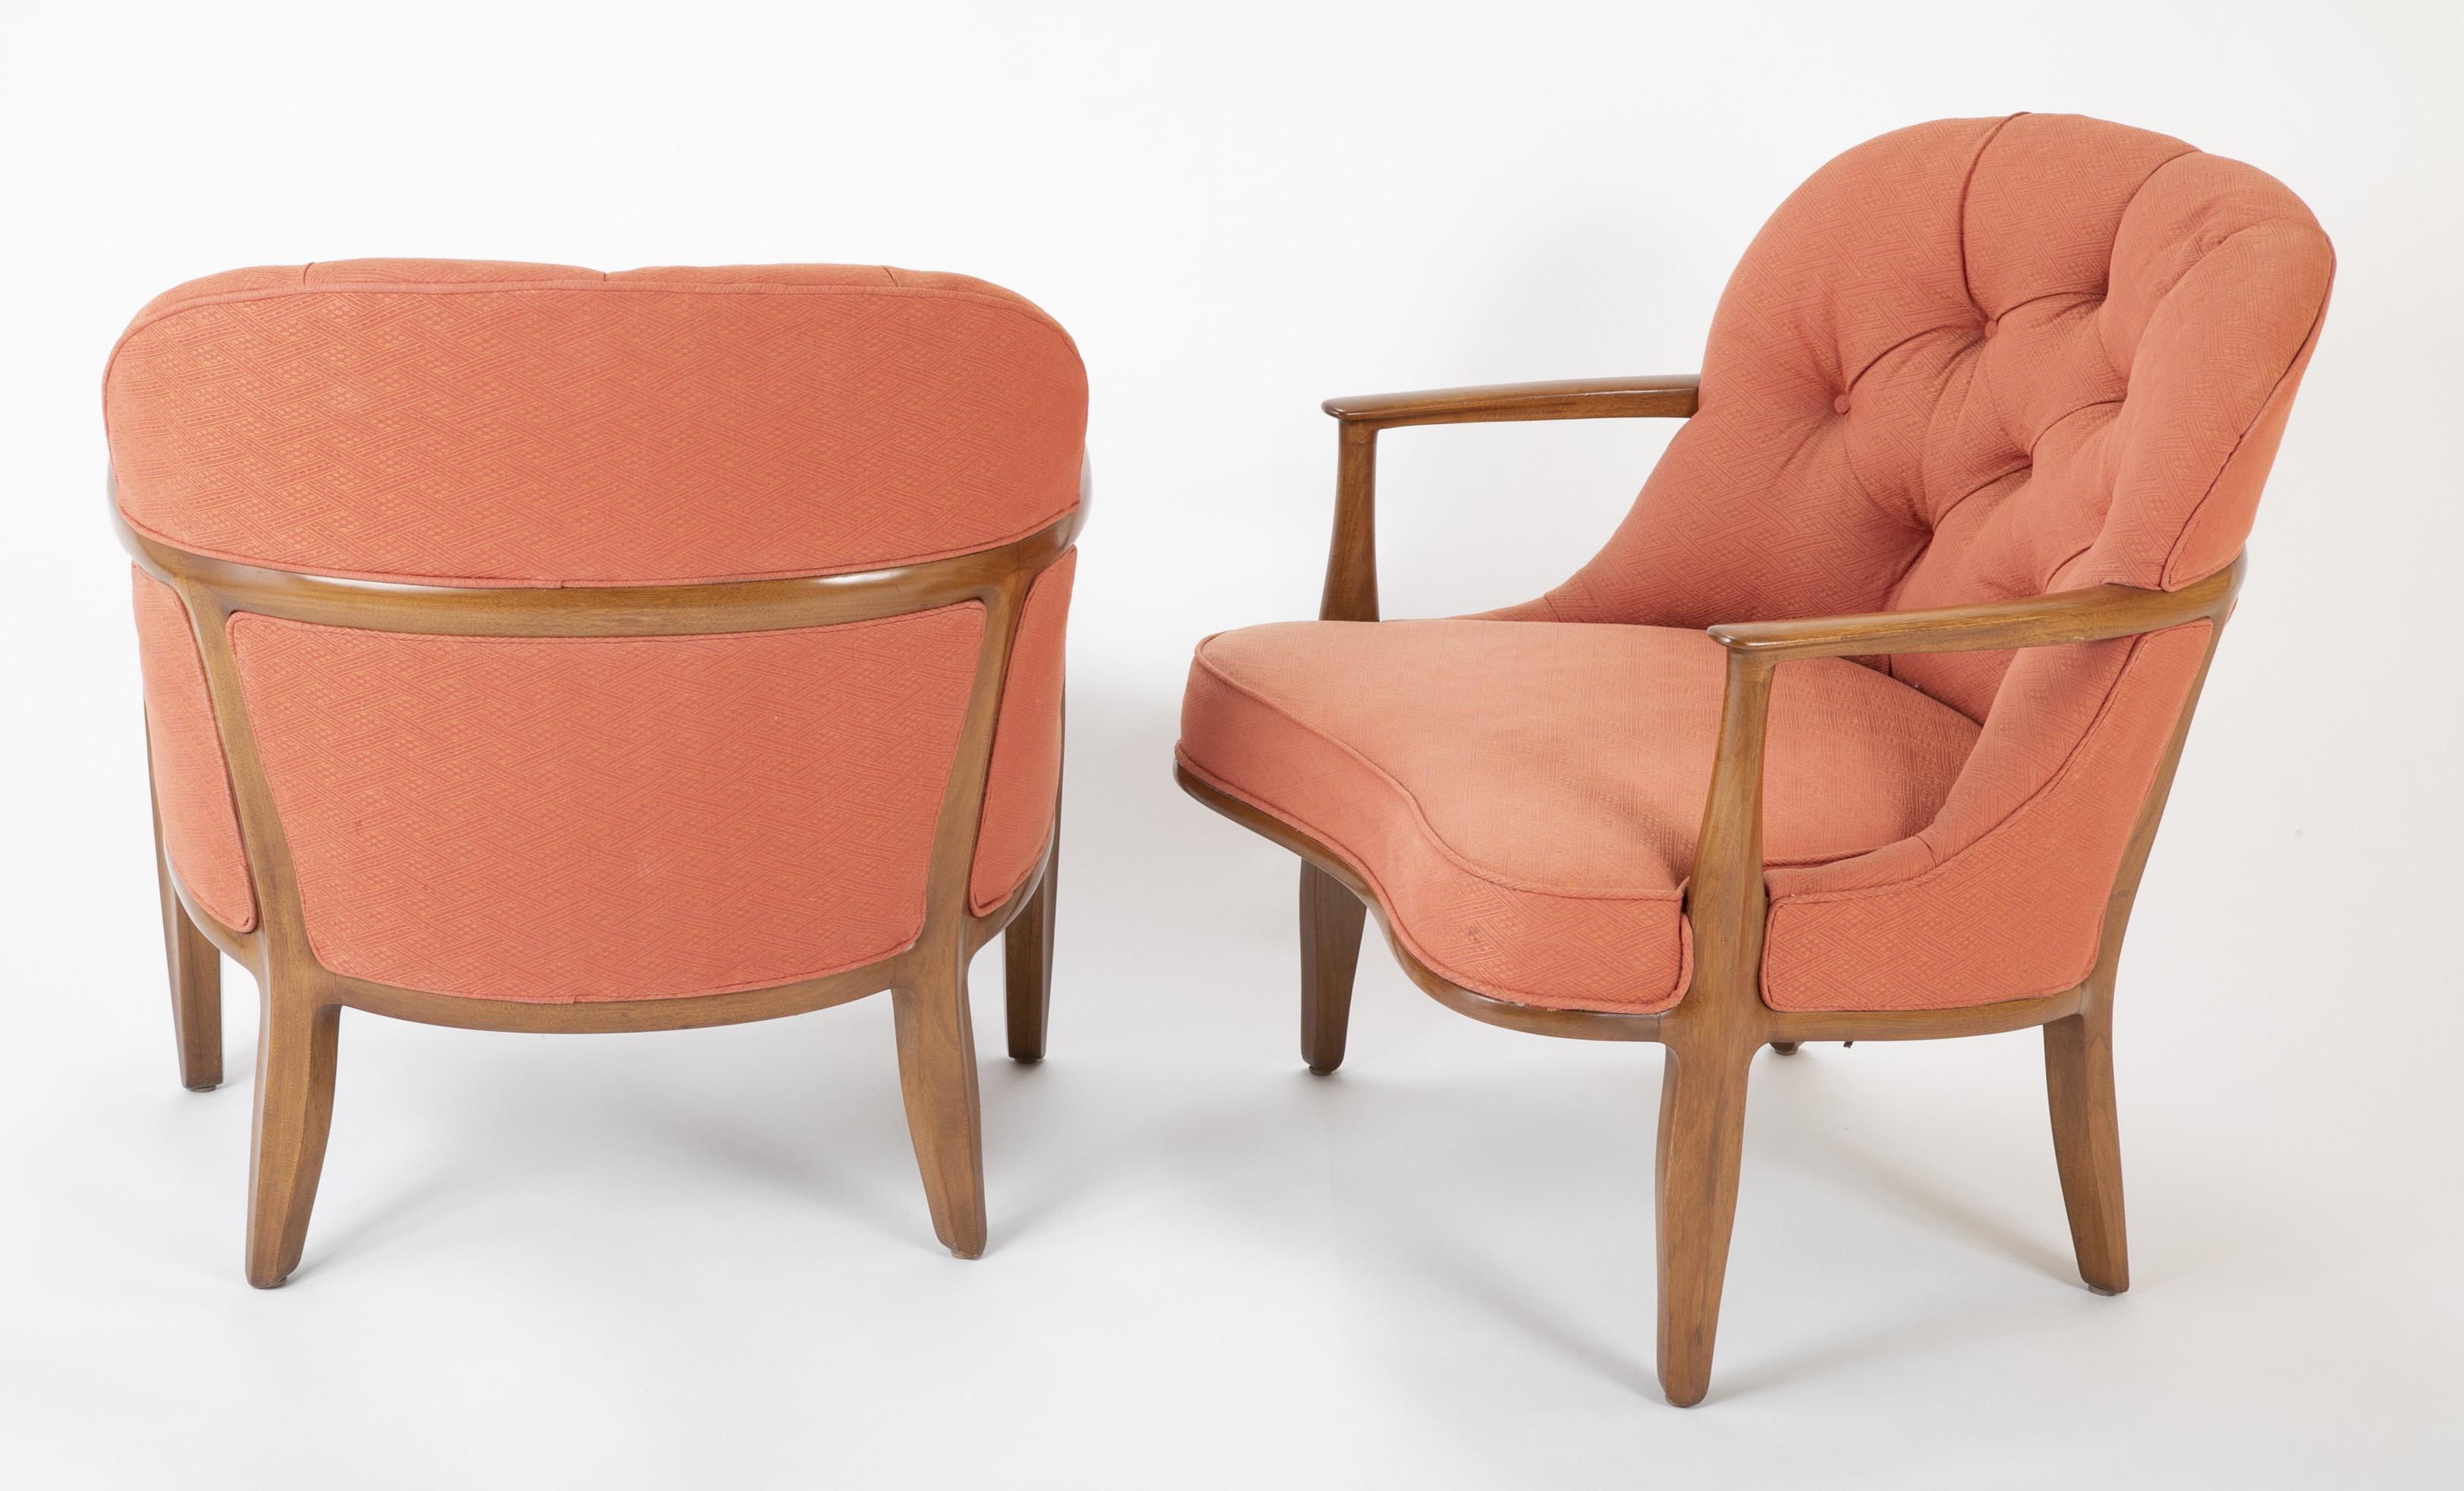 A pair of model 5705 walnut armchairs designed by Edward Wormley for Dunbar. Part of what many consider to be Wormley’s finest collection of furniture, mid-20th century.